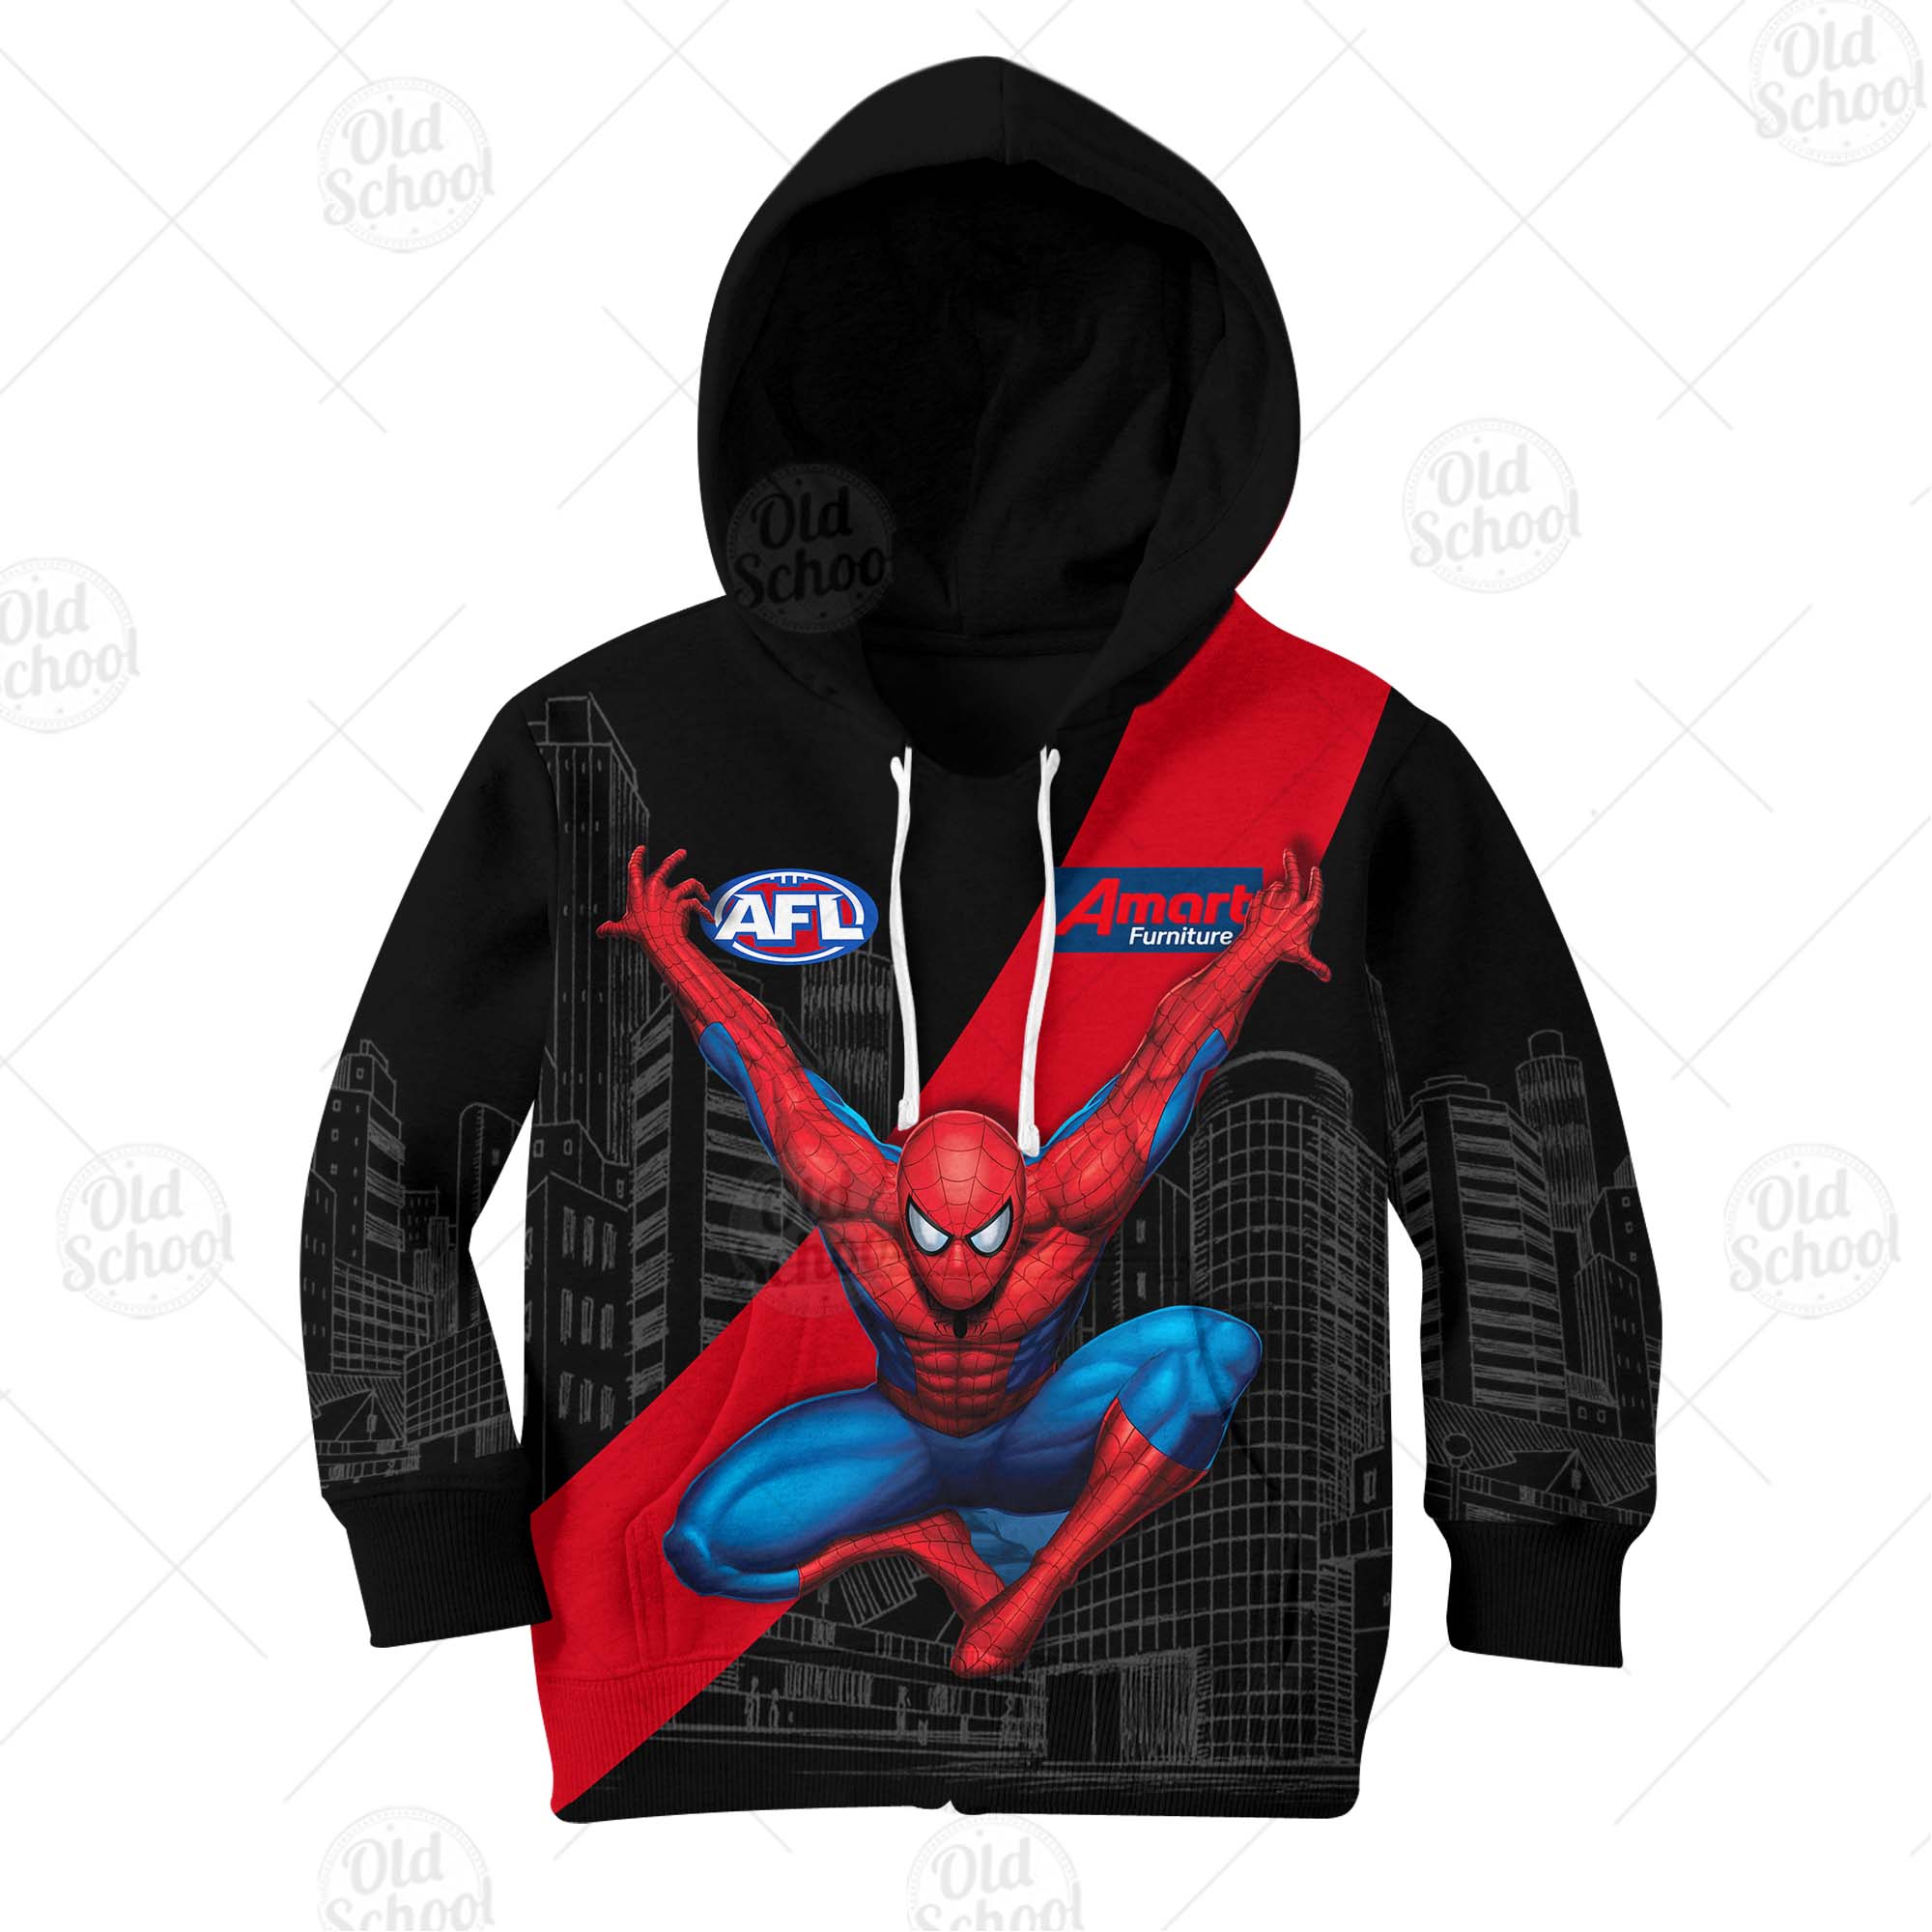 Personalise AFL Essendon Bombers x Spiderman 2020 Jersey for Kids